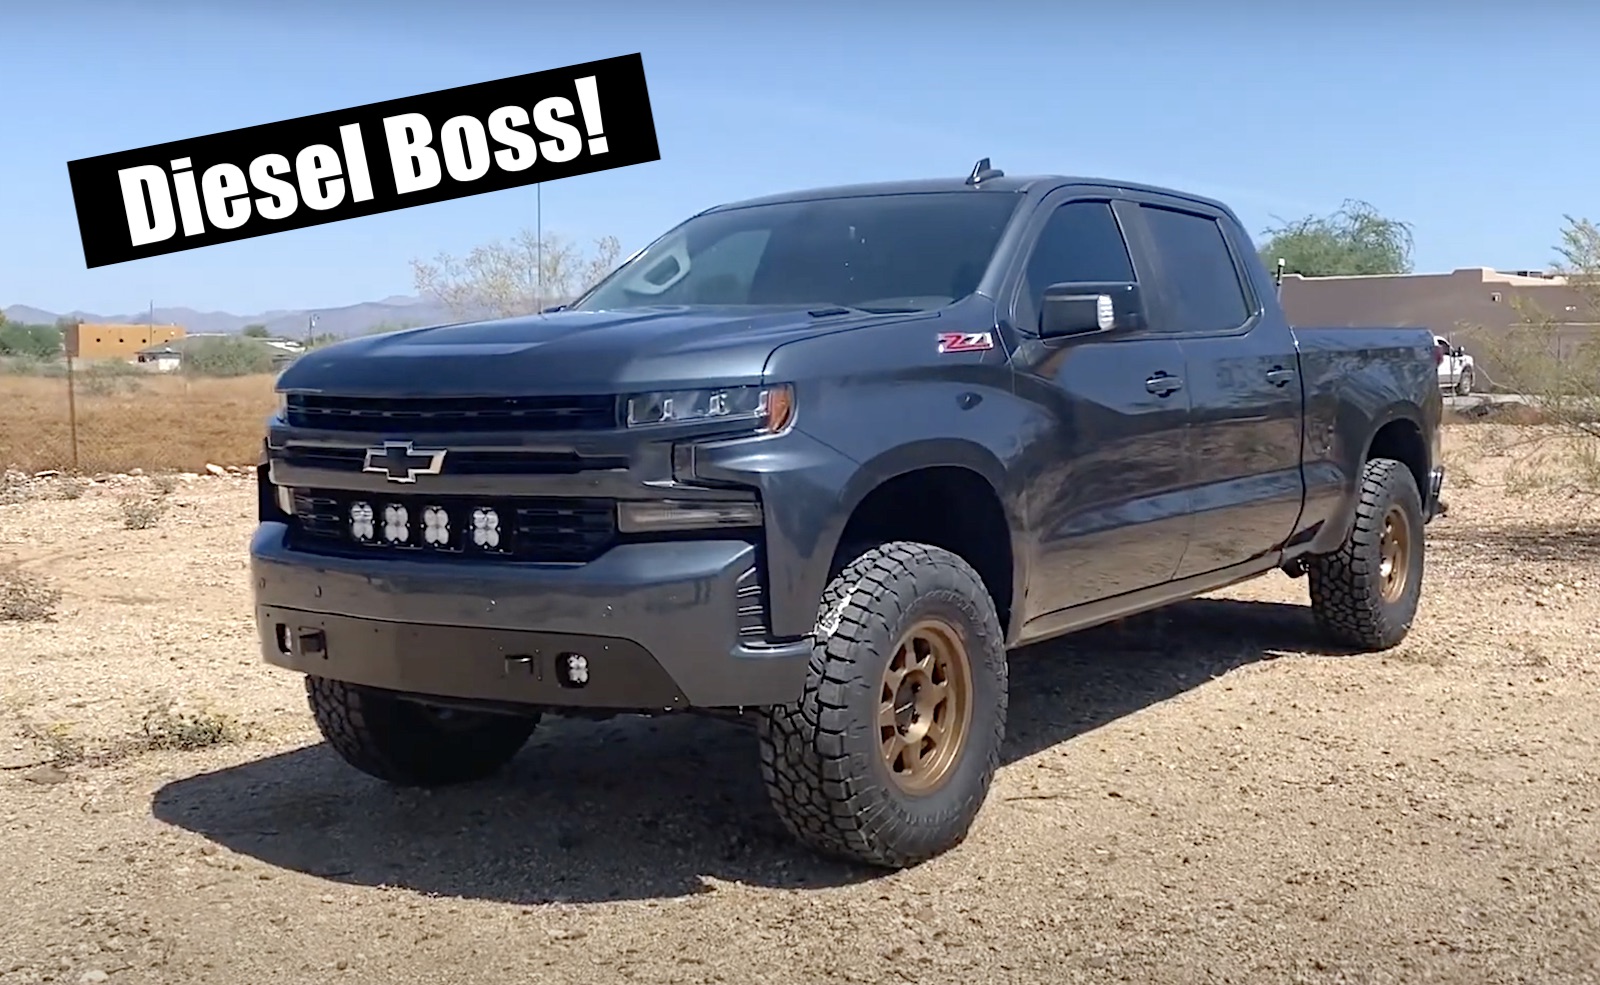 Diesel Boss! This Chevy Silverado 1500 Duramax Is Built For High Speed Off-Road Fun! - The Fast